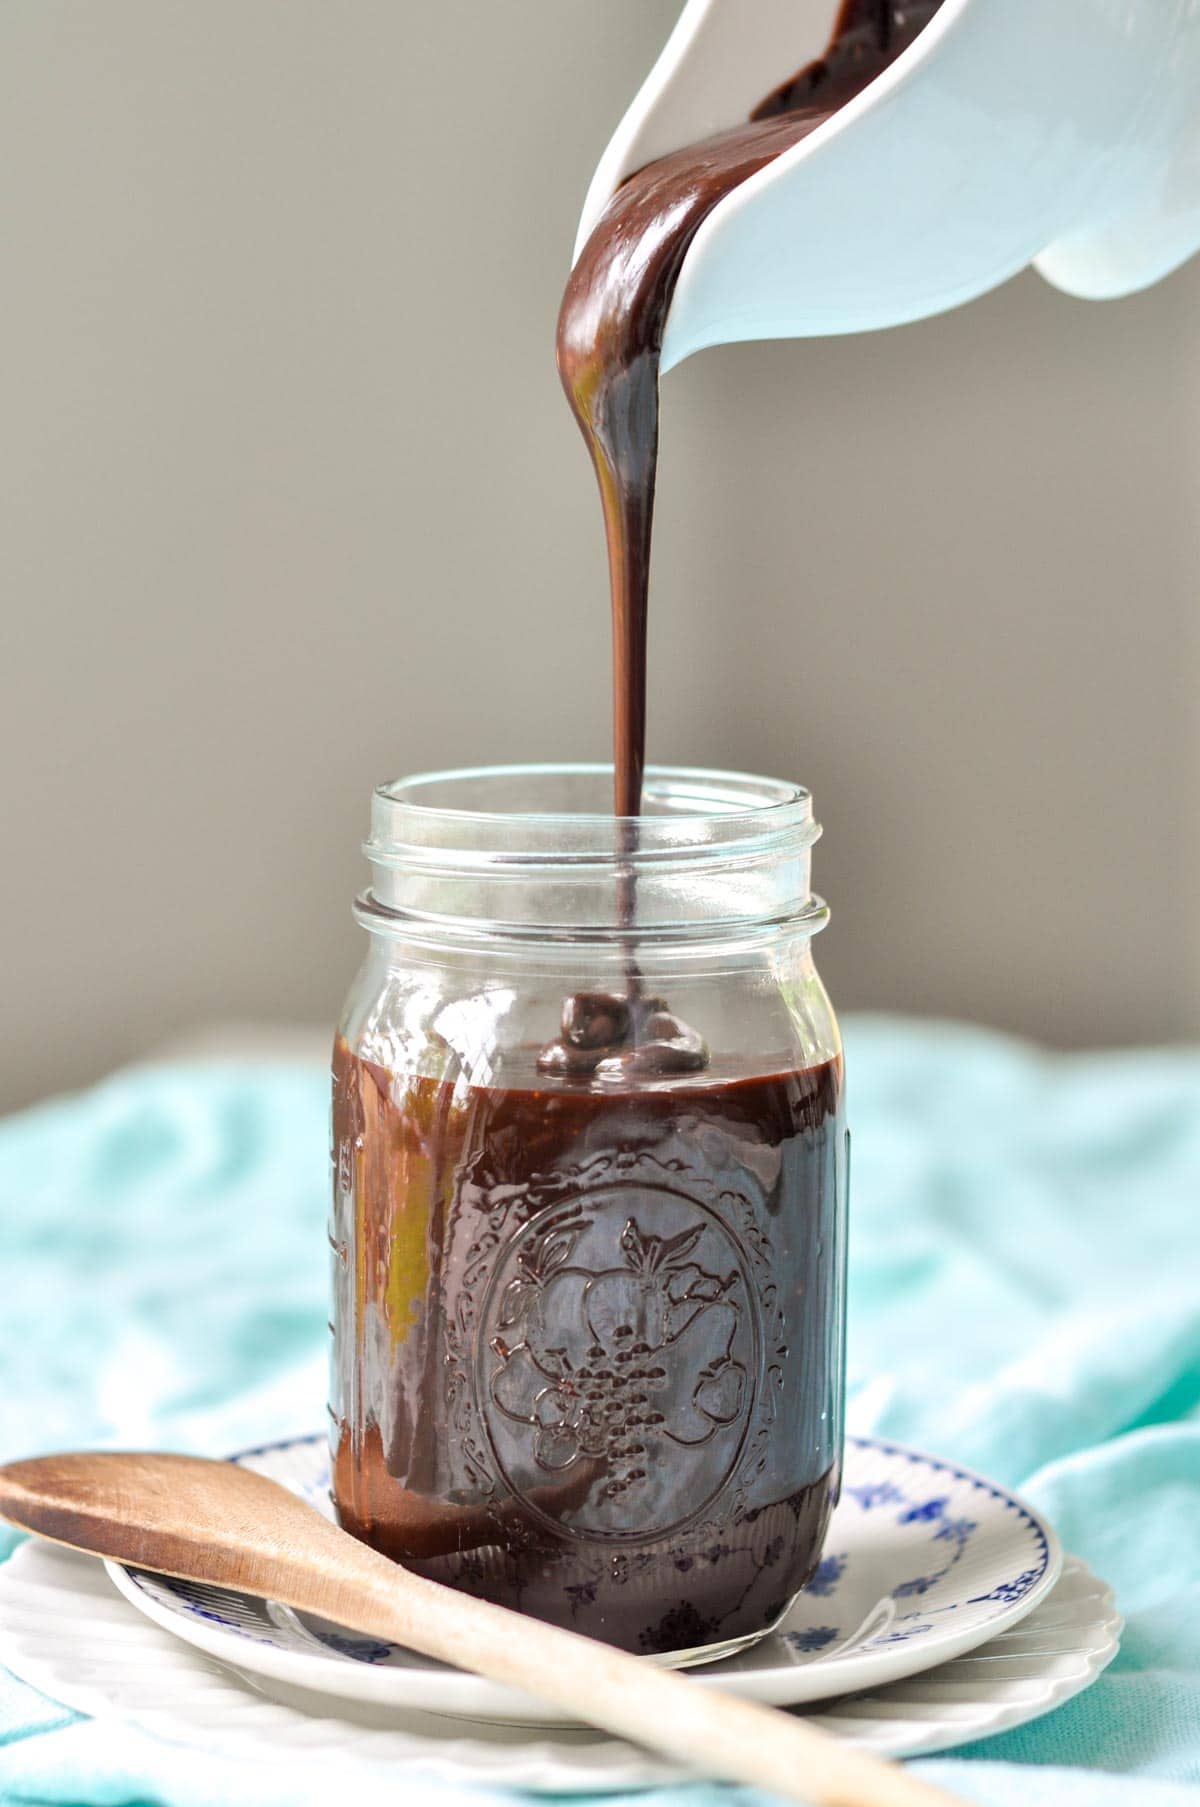 hot fudge sauce being poured into a glass jar